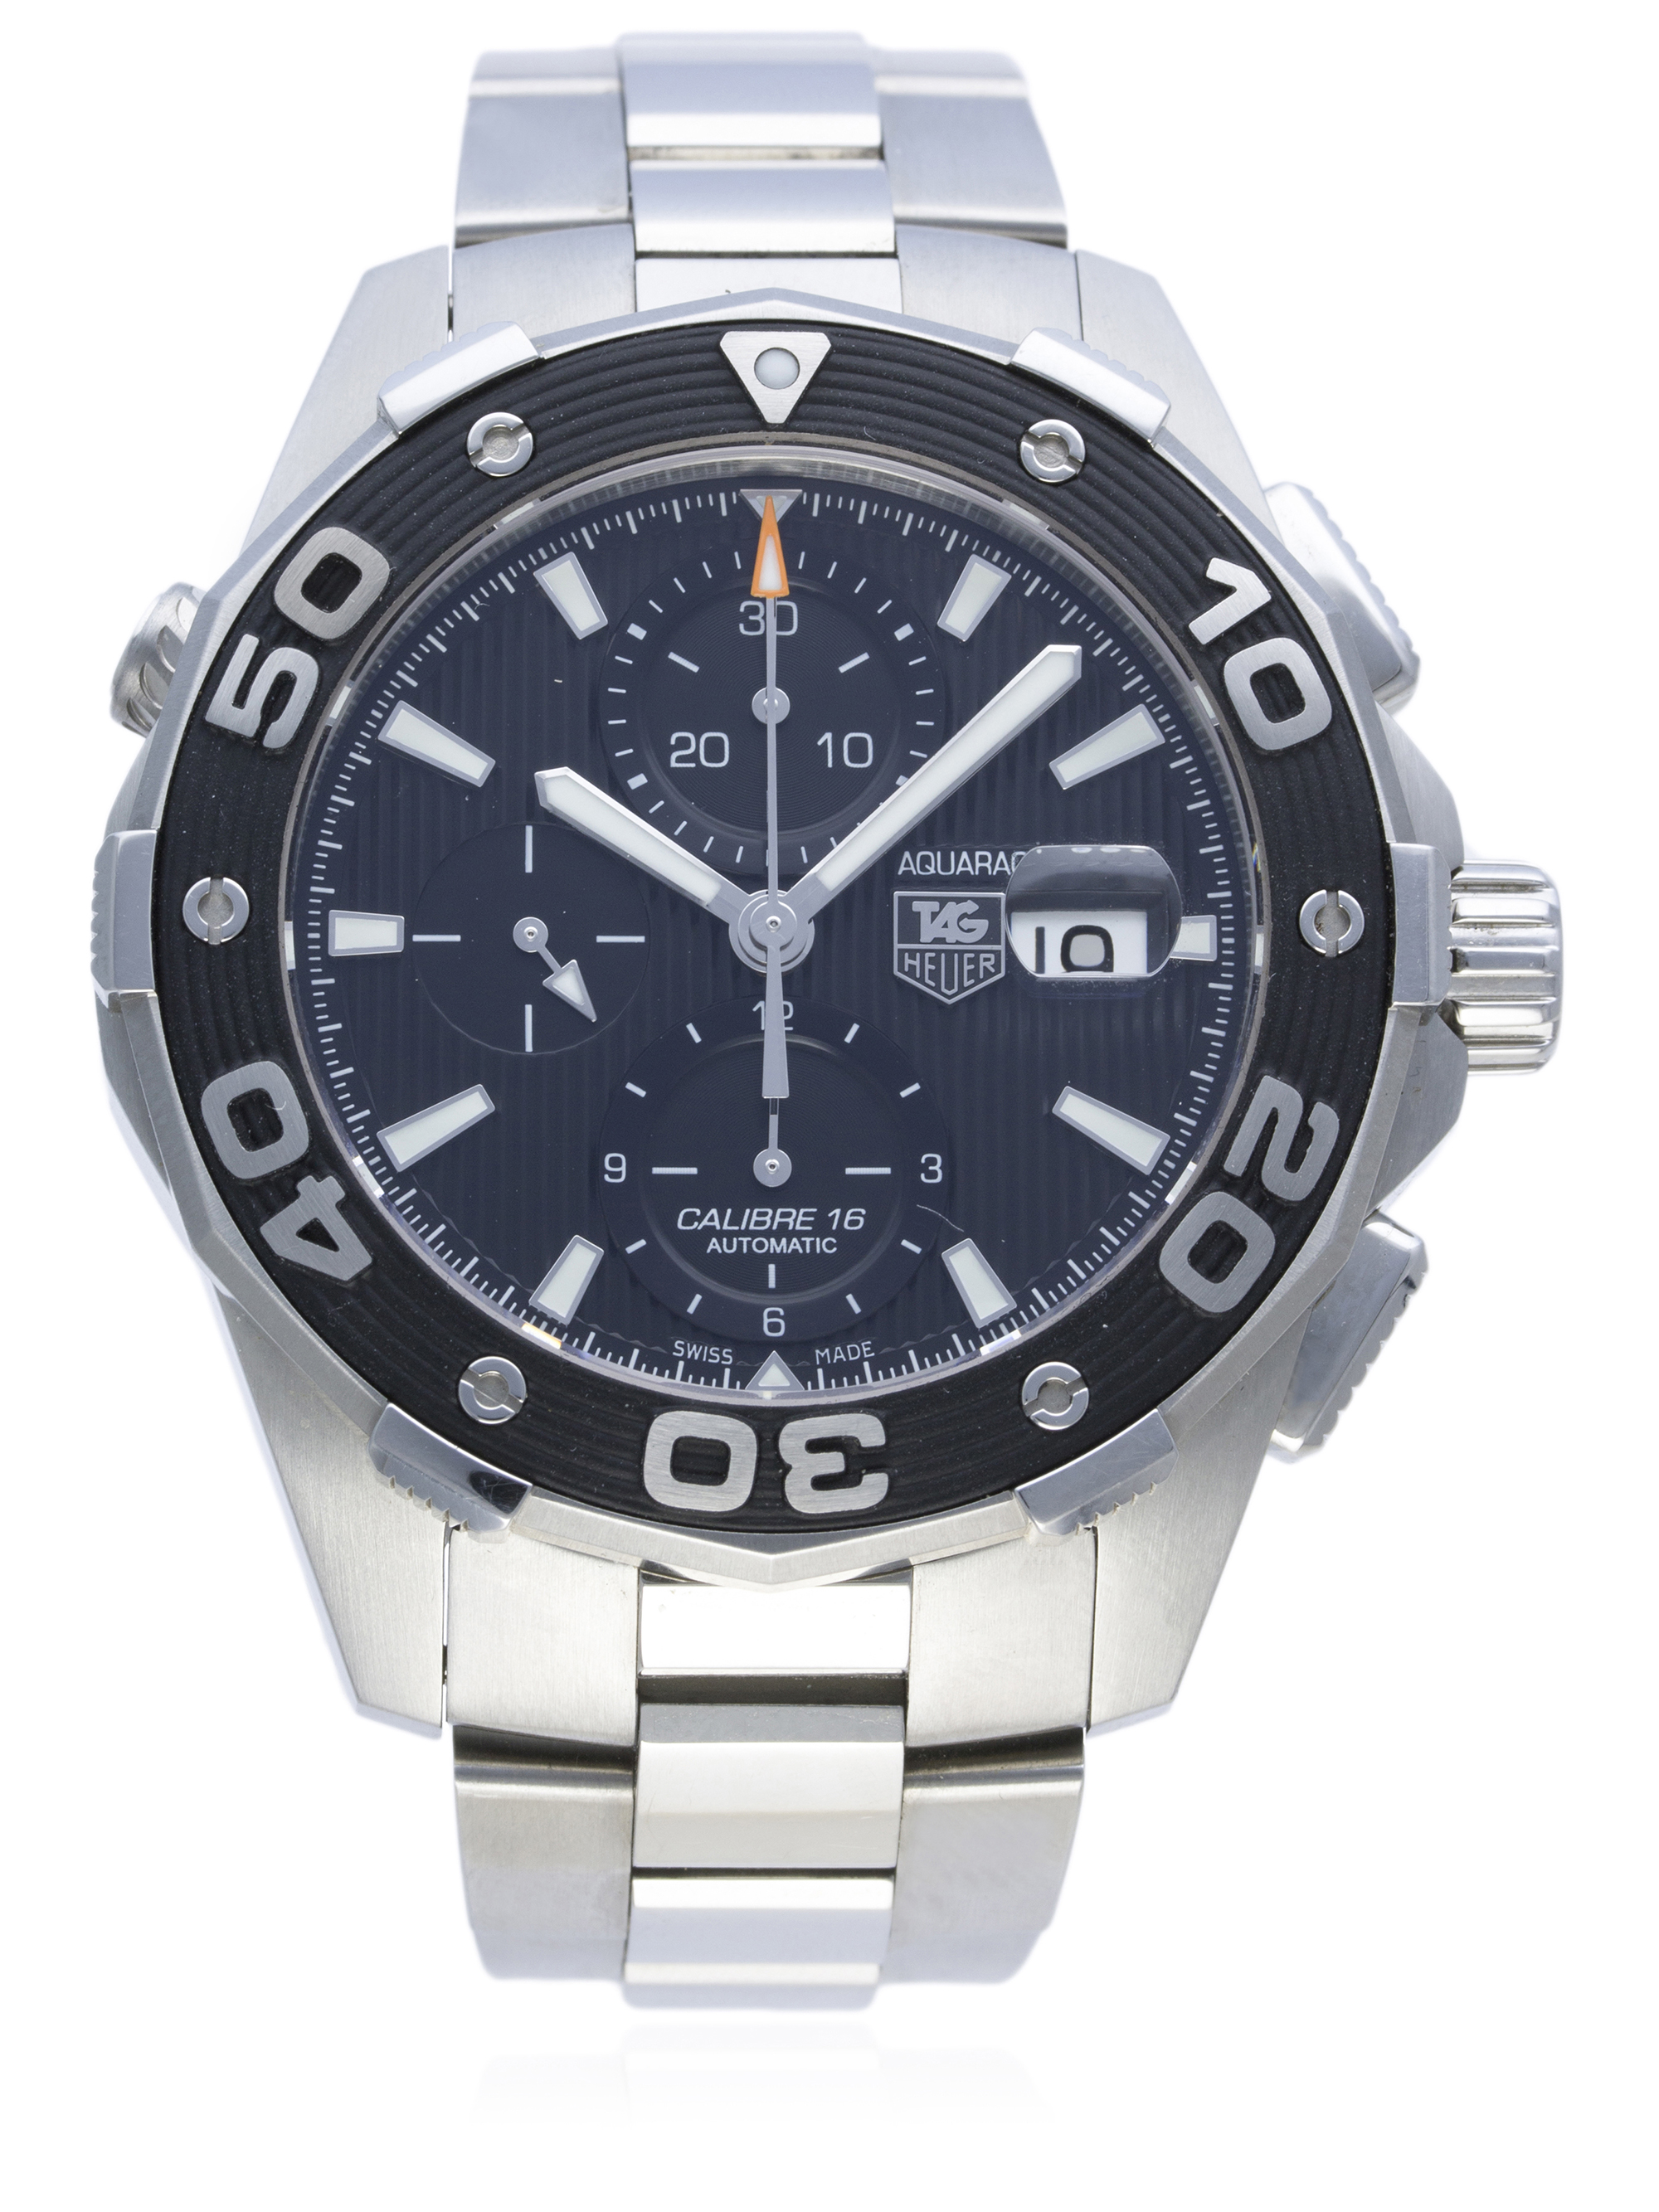 A GENTLEMAN'S STAINLESS STEEL TAG HEUER AQUARACER 500M AUTOMATIC CHRONOGRAPH BRACELET WATCH DATED